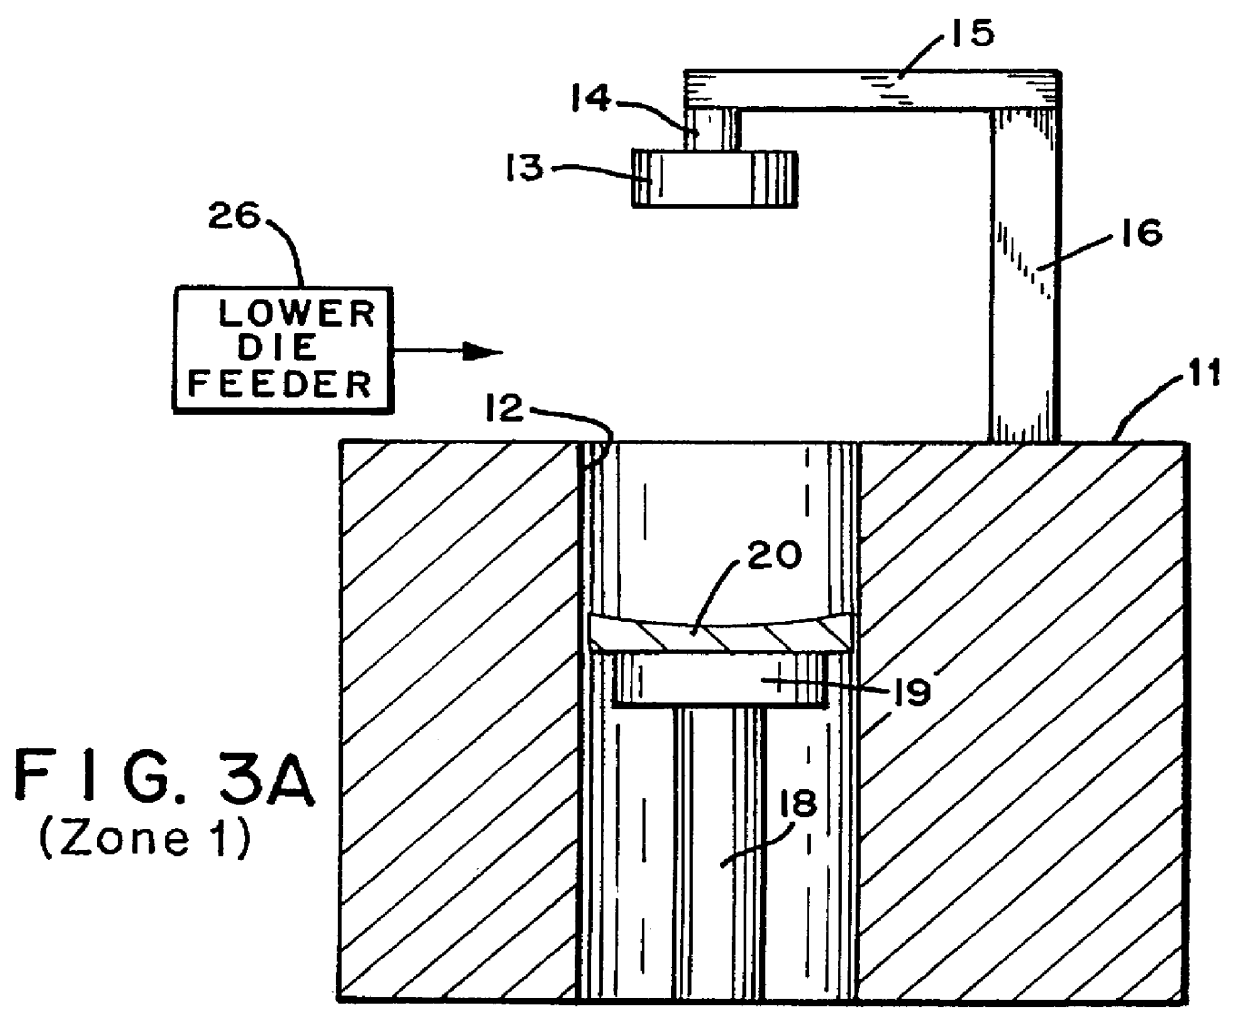 Continuous extrusion-compression molding process for making optical articles